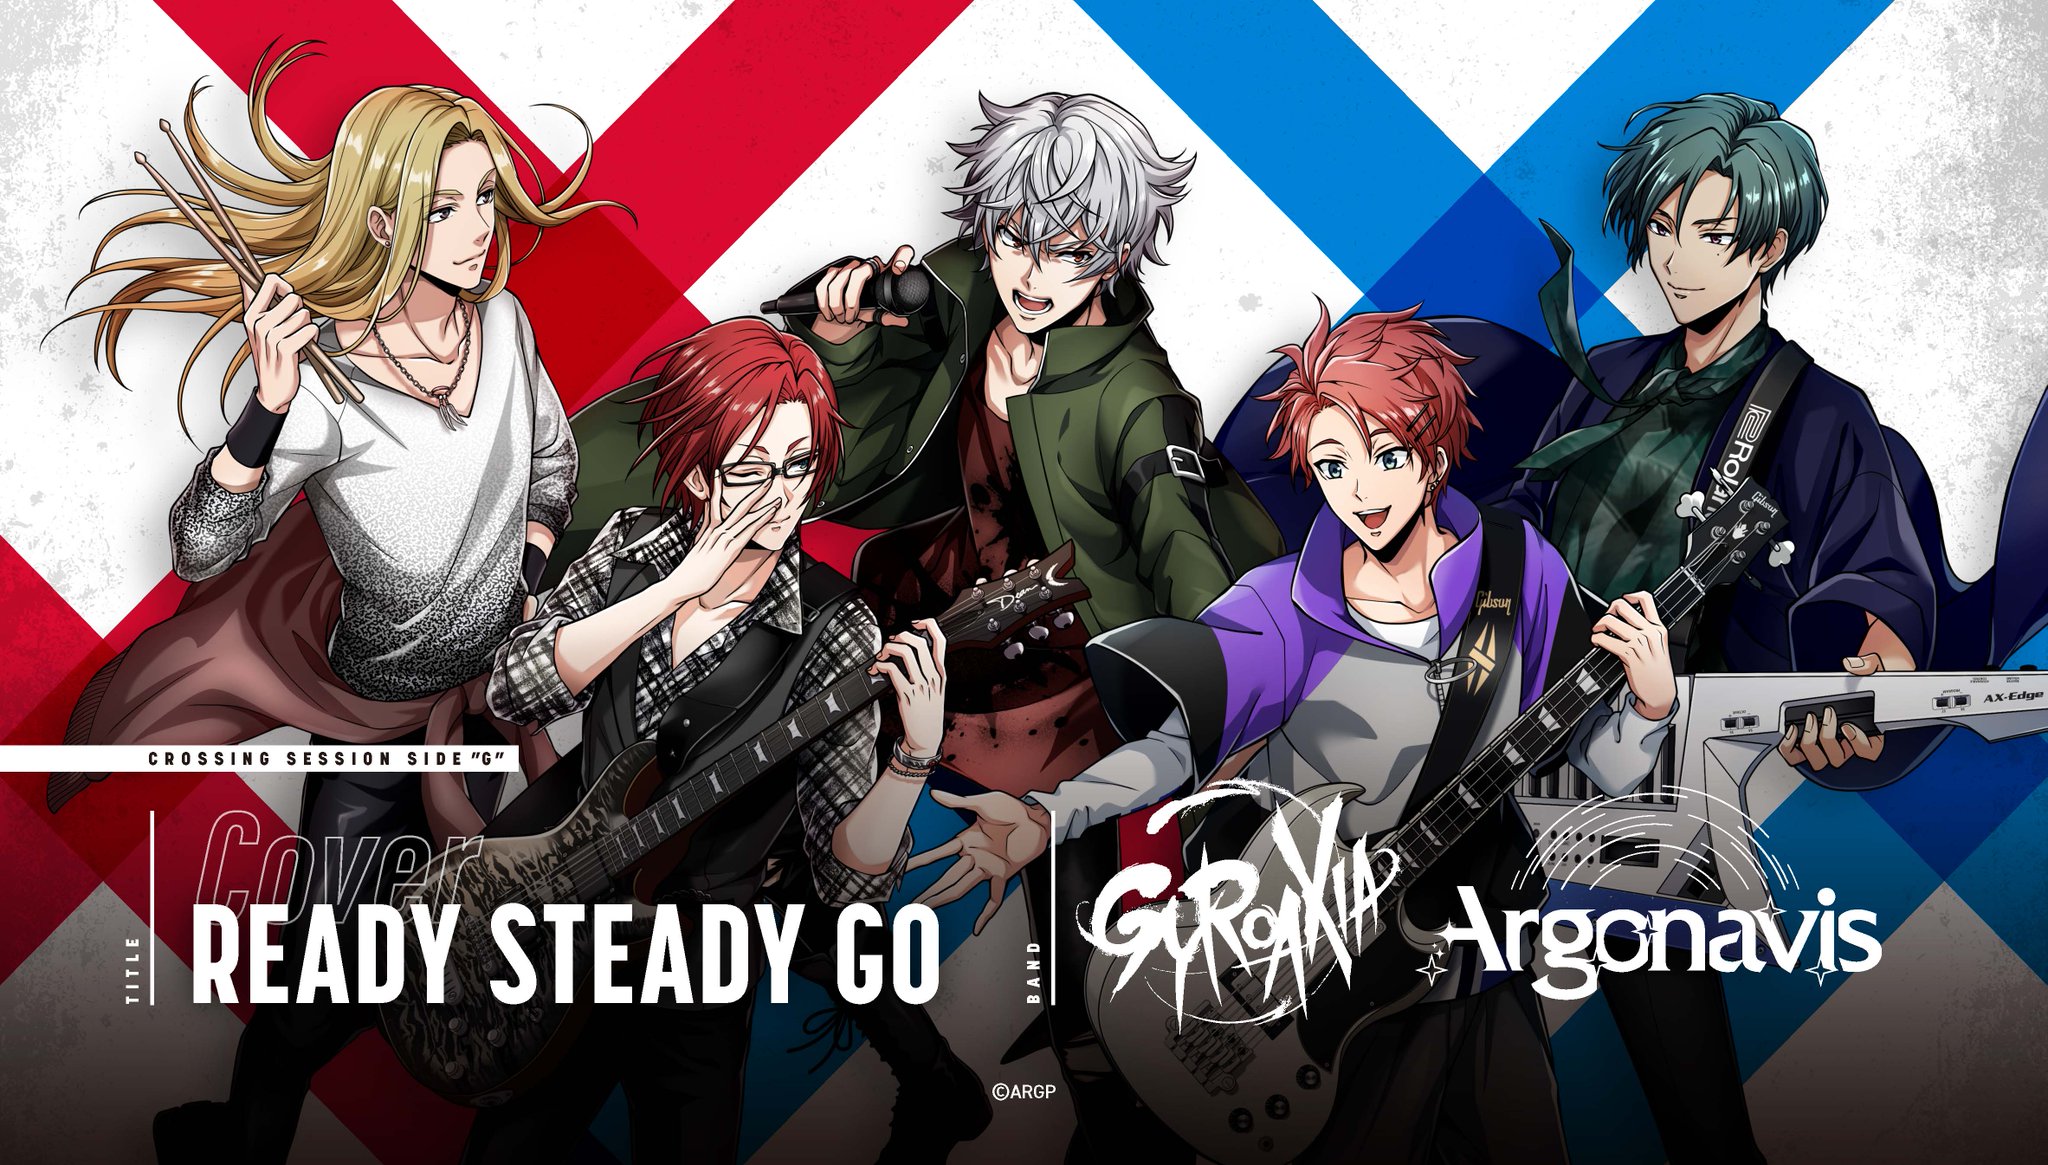 Argonavis From Bang Dream アルゴナビス フロム バンドリ 公式 アルゴナビスsol Day1 Now On Play Crossing Session Side G M16 Ready Steady Go Cover 音声だけの新しい体験型ライブを完全無料で配信中 T Co Imwij305vt